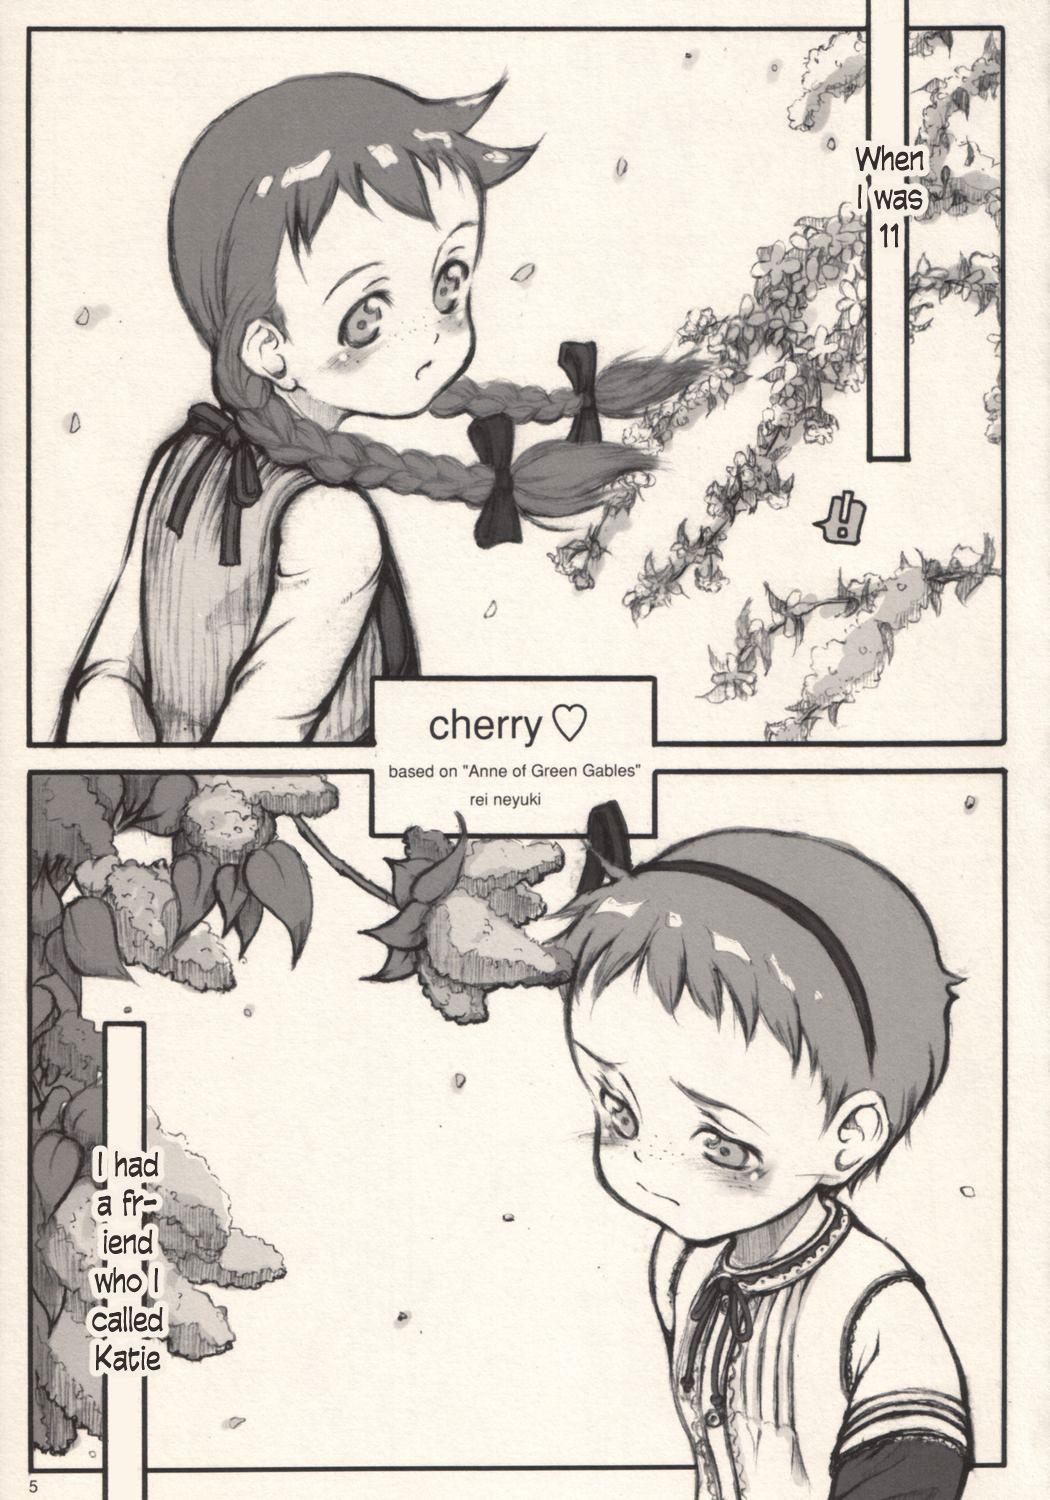 Homo cherry - World masterpiece theater Anne of green gables | akage no anne Jerkoff - Page 4